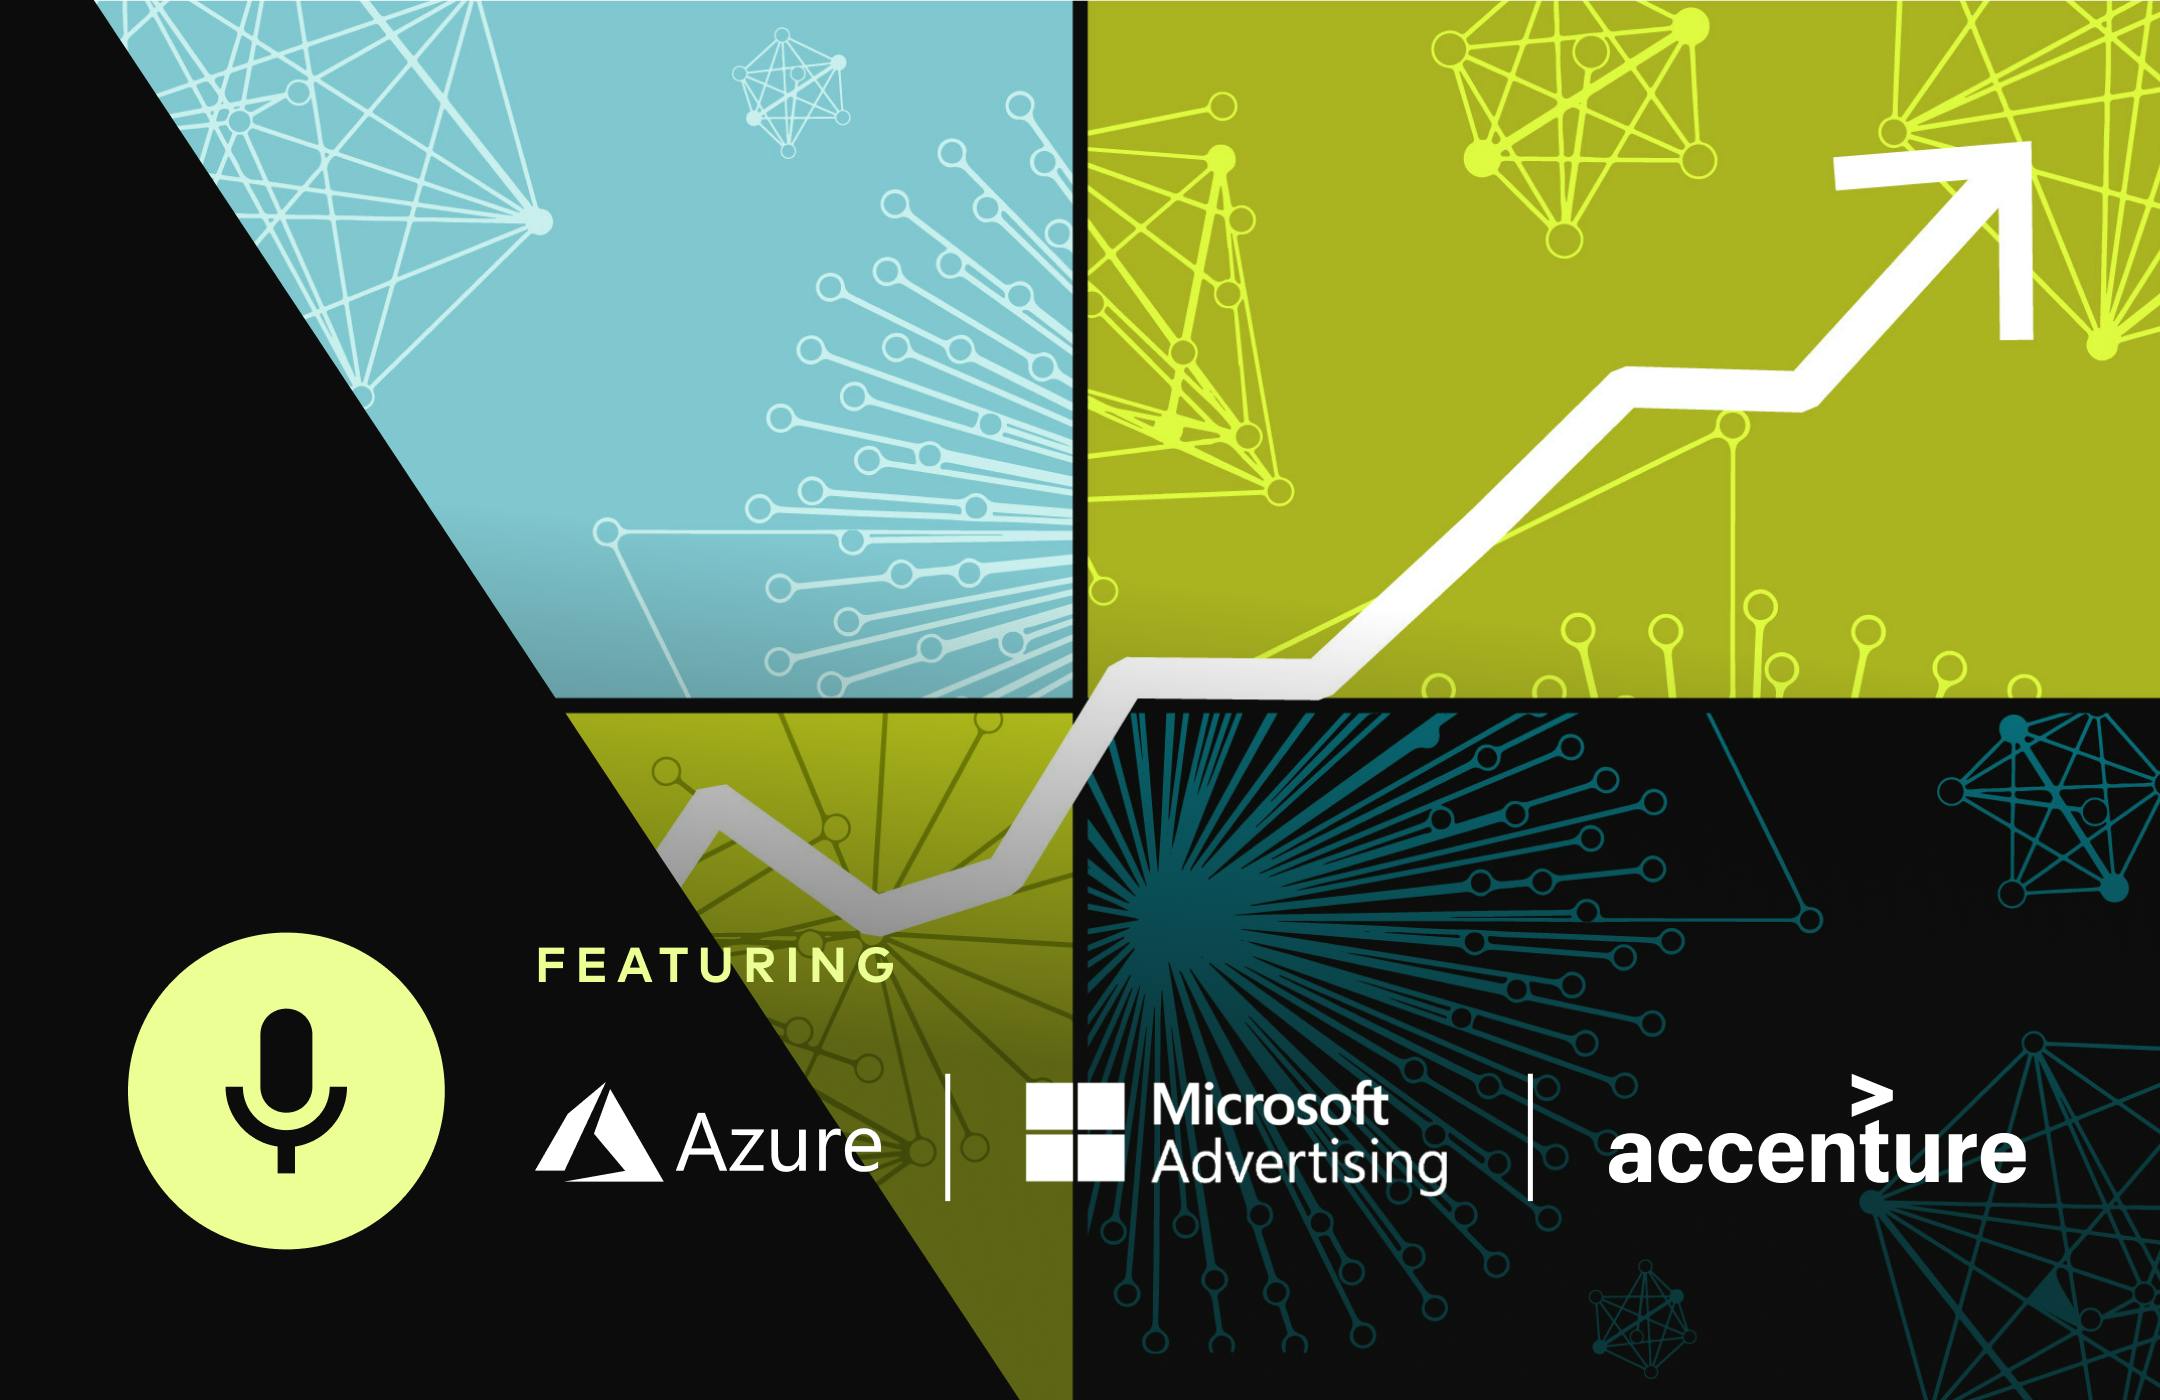 Featuring Azure, Microsoft Advertising, and Accenture.